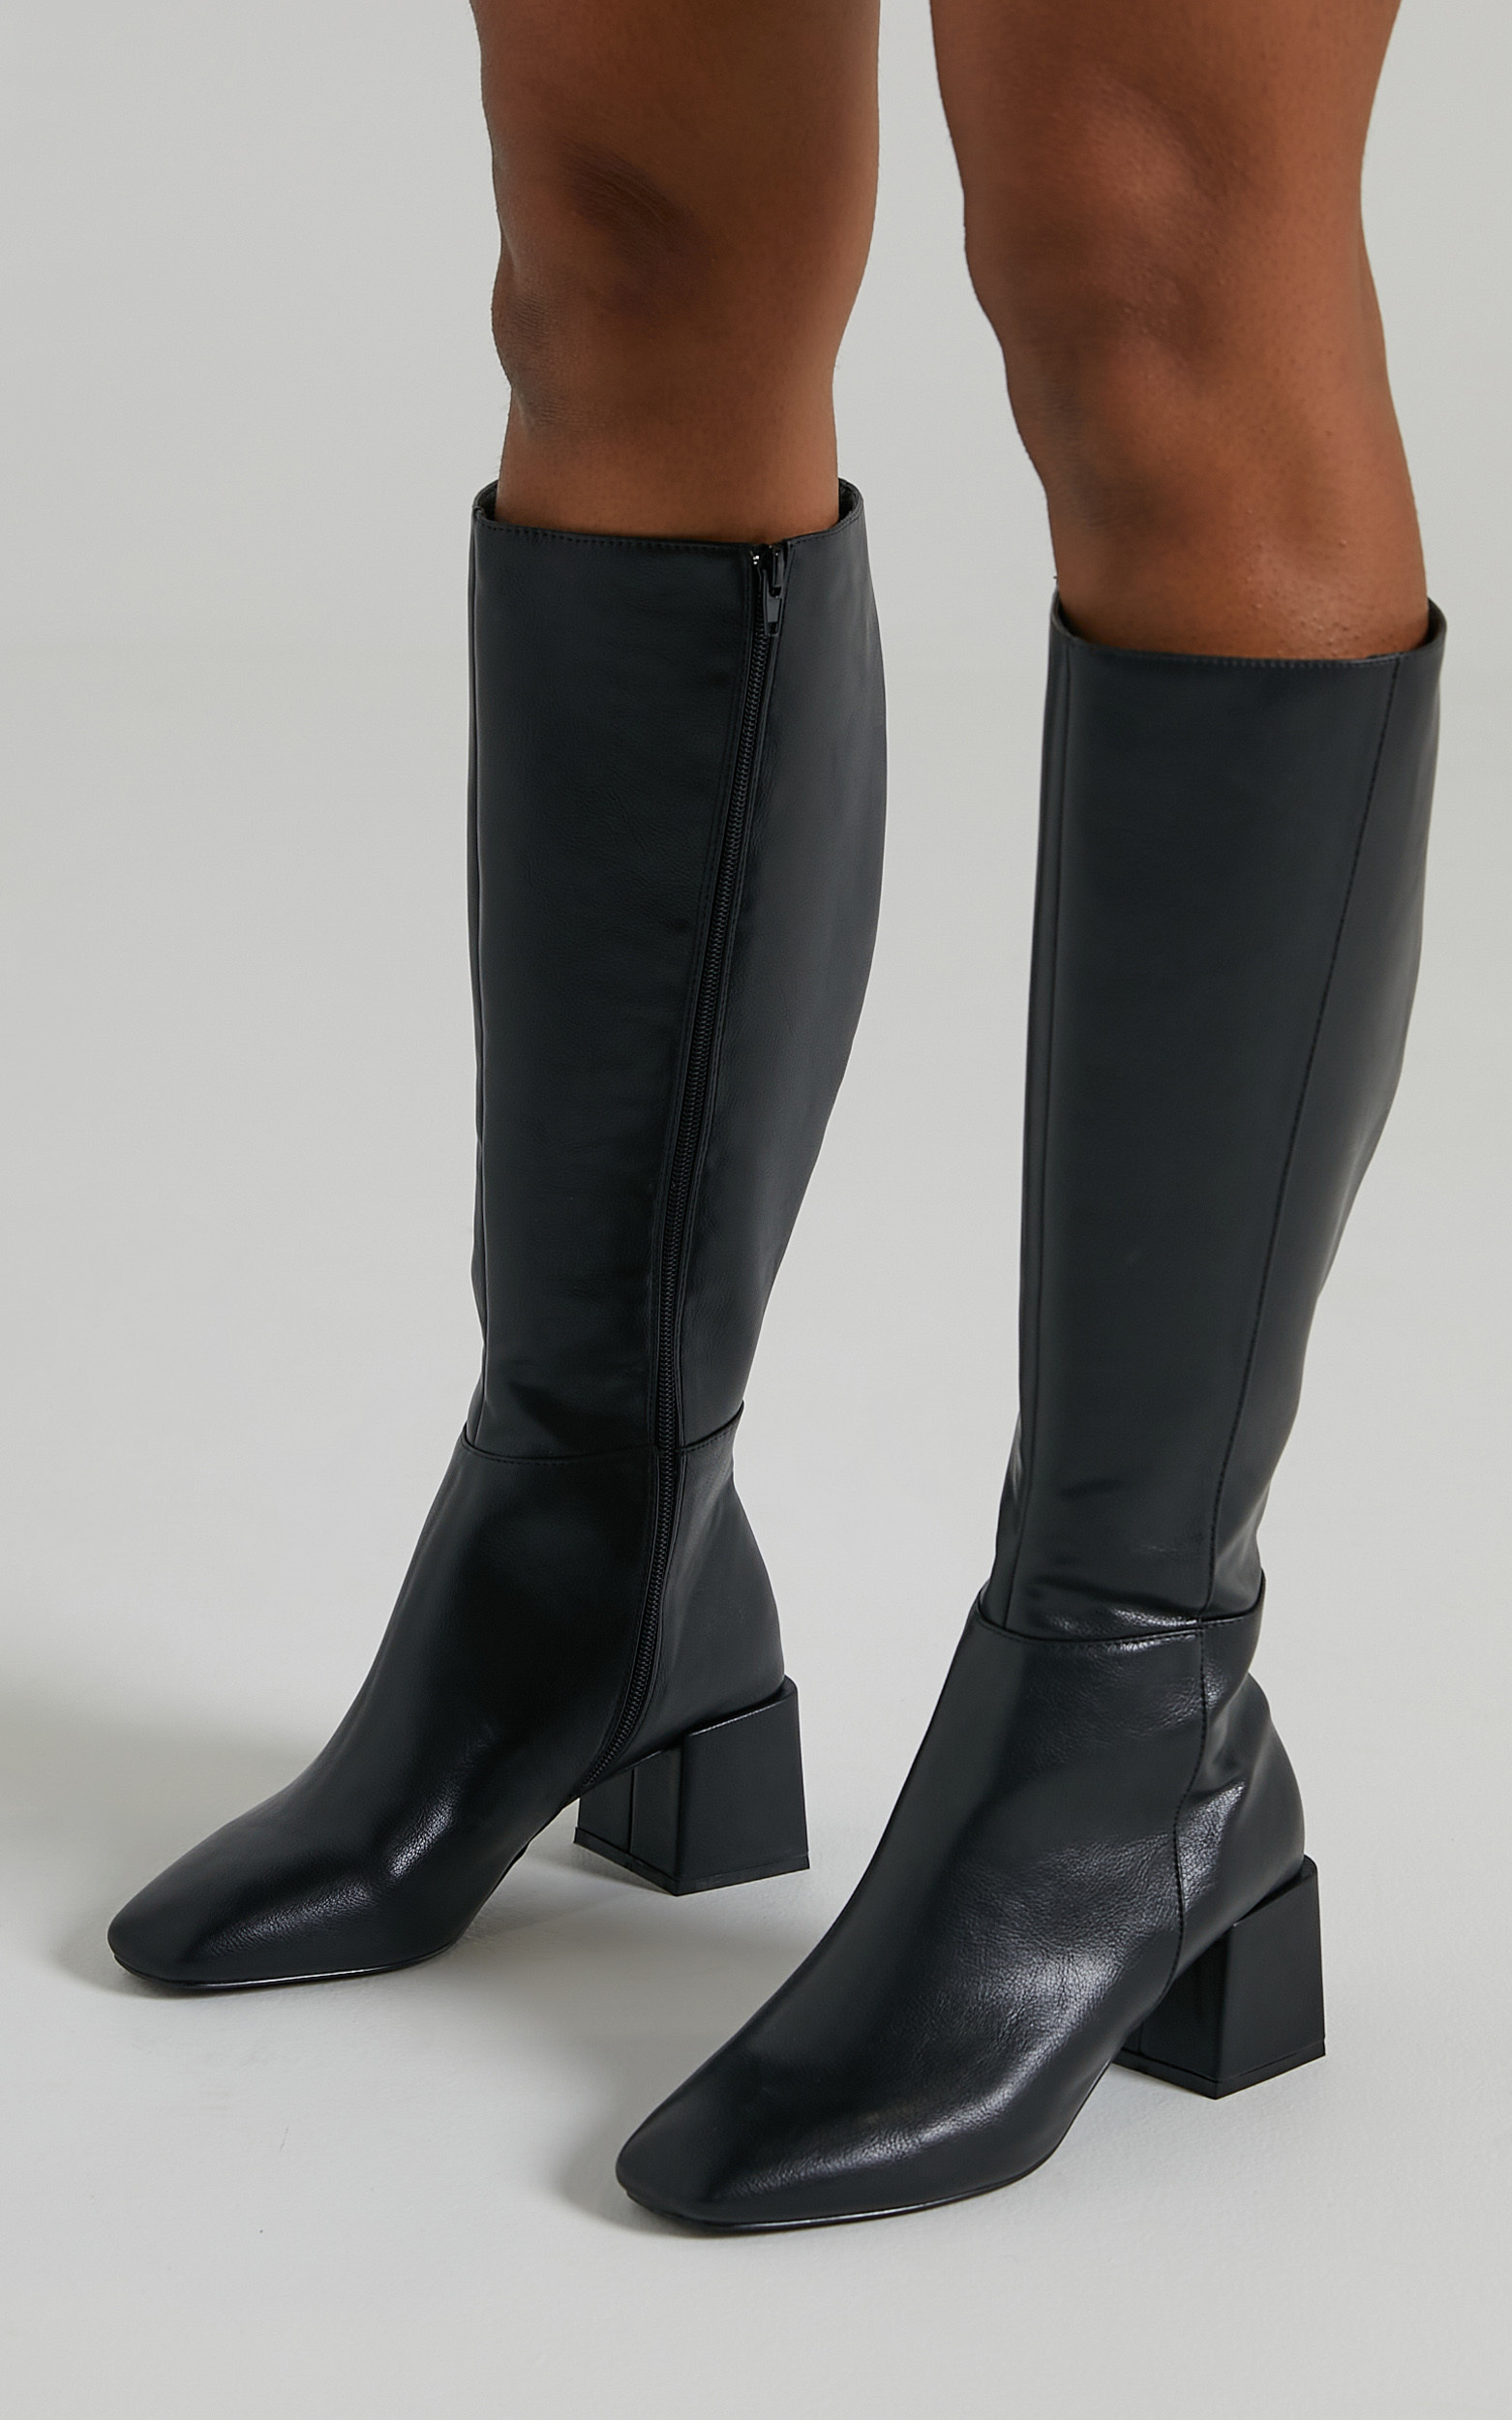 Therapy - Wolf Boots in Black Matte PU | Showpo